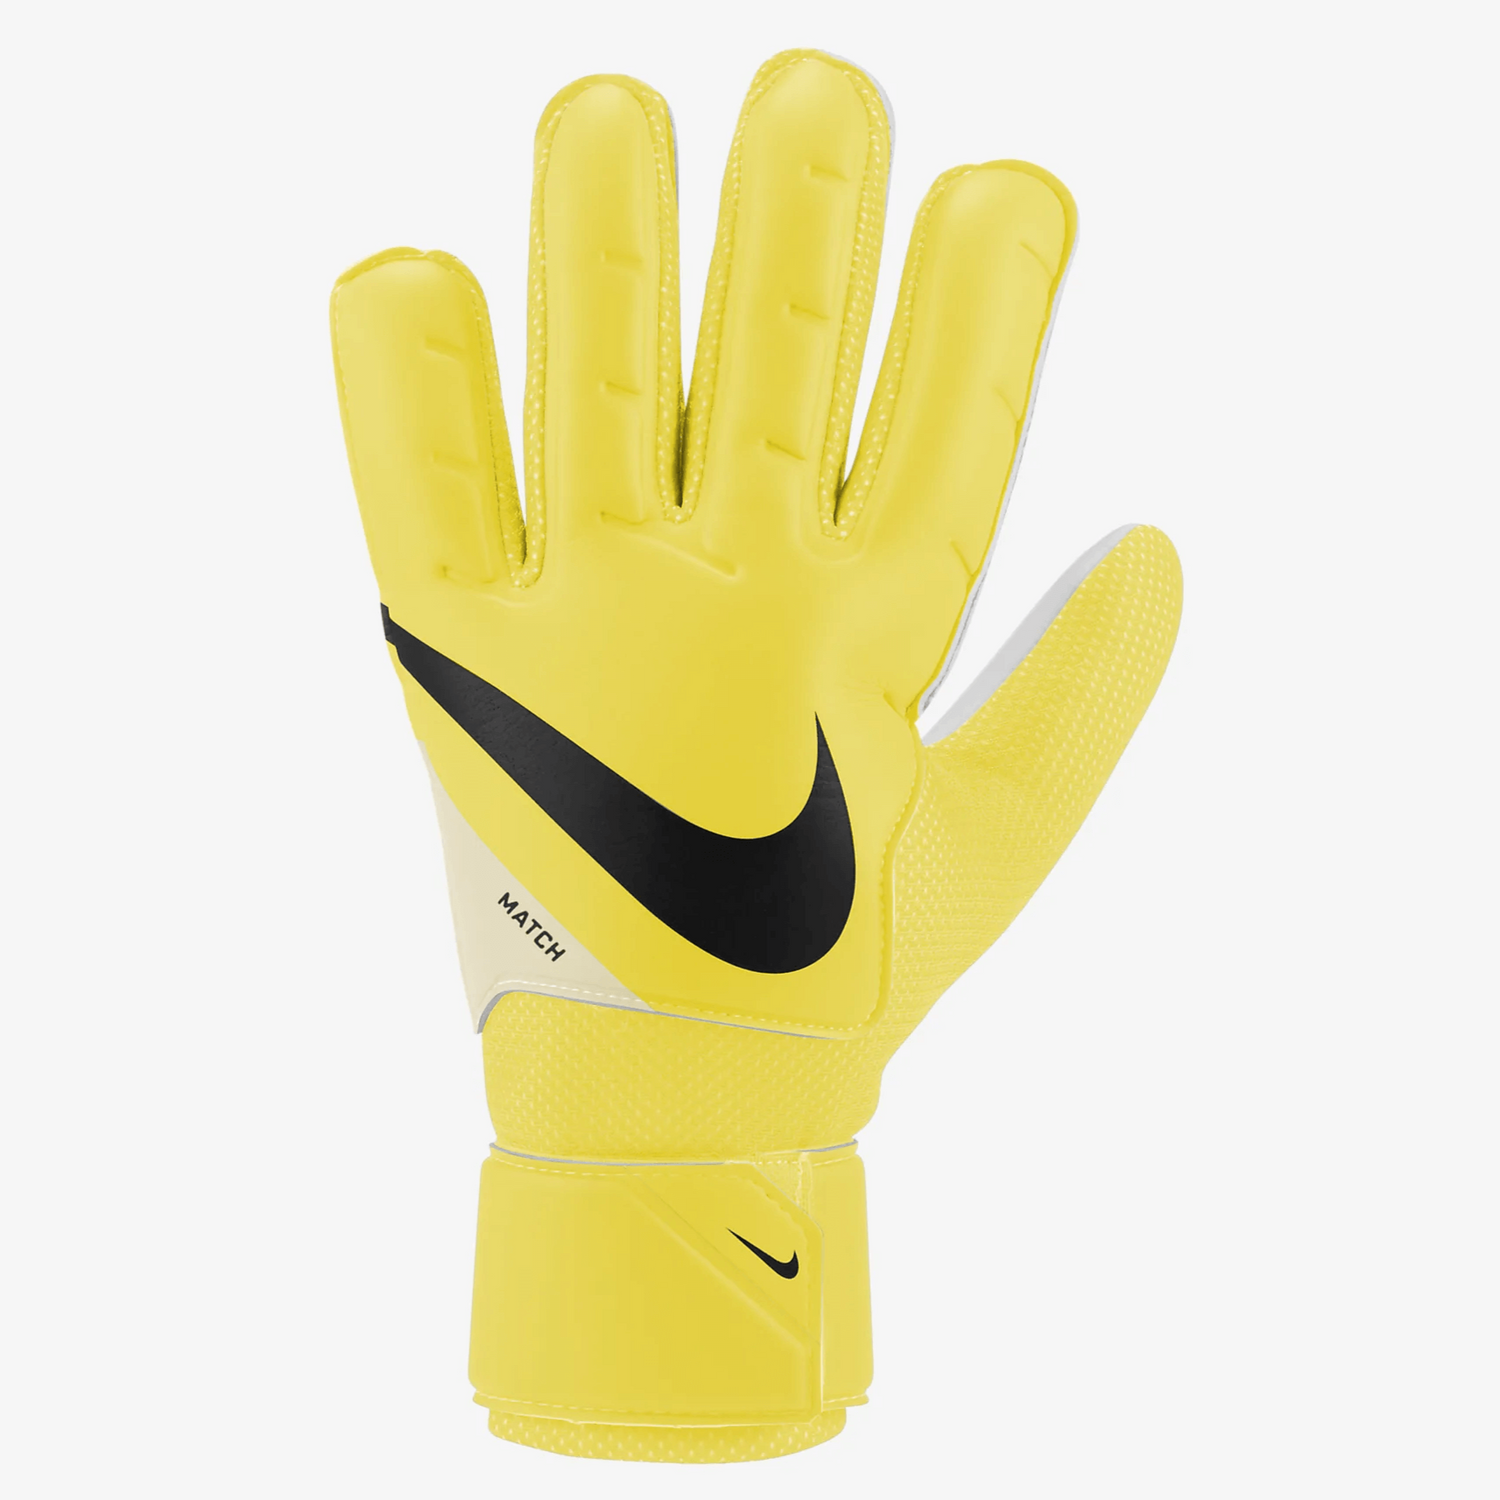 Nike Match Goalkeeper Gloves Yellow-Black (Single - Outer)